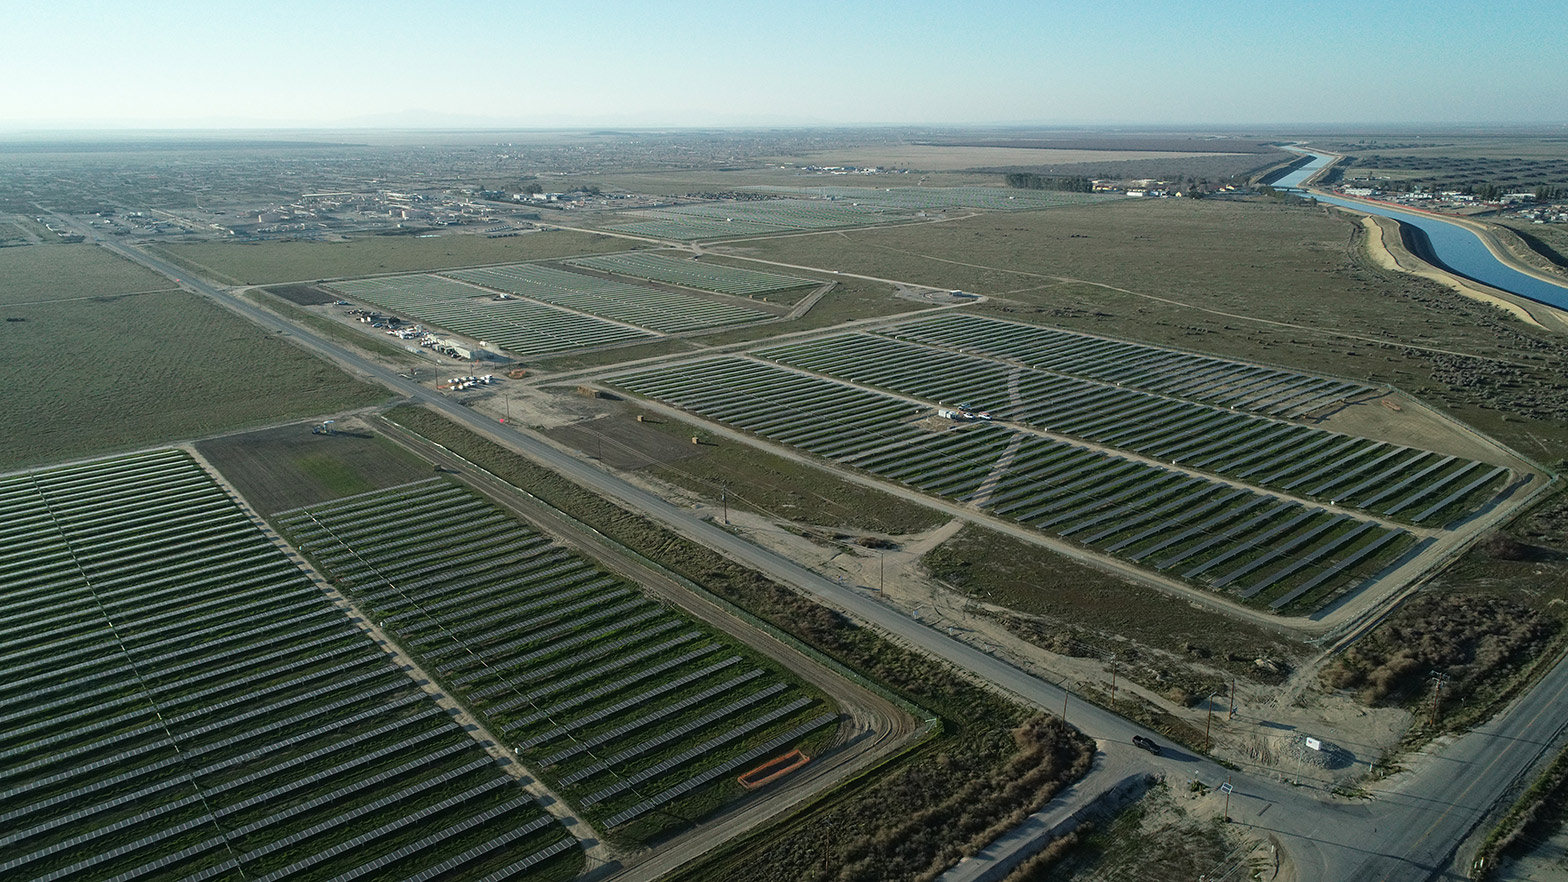 The 220-acre solar field at Lost Hills will produce lower carbon hydrogen and power the existing facility.